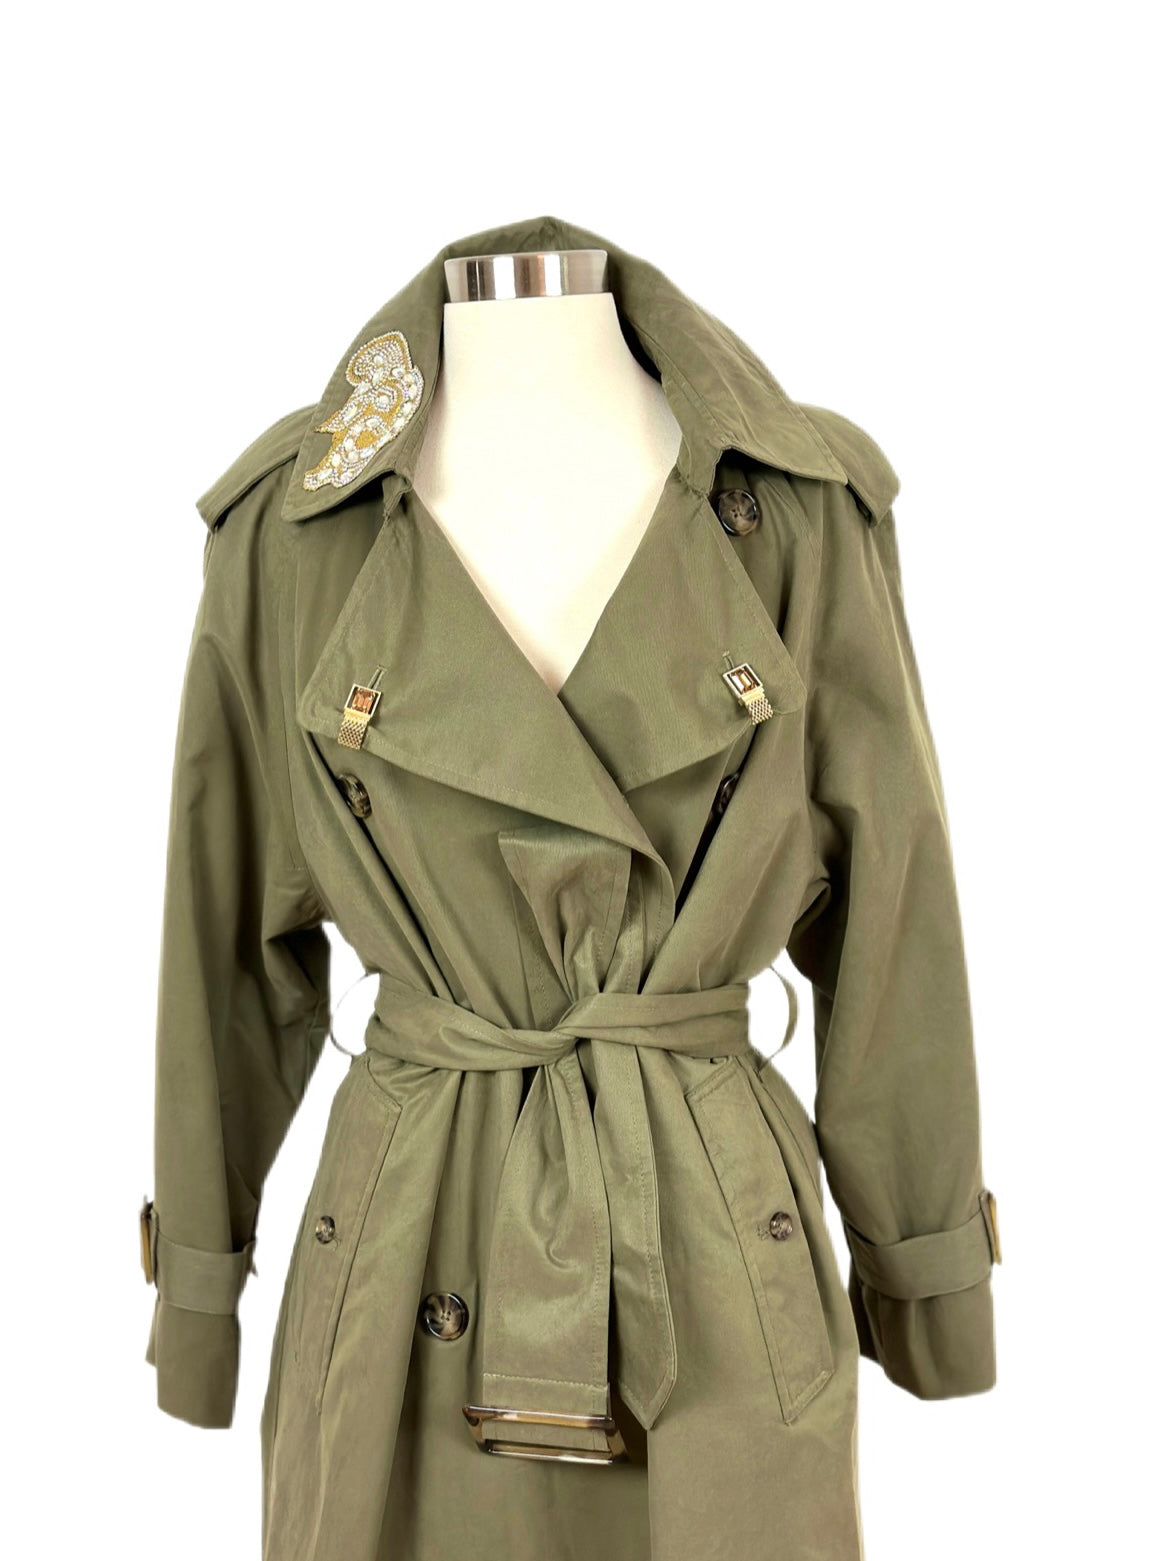 Vintage Trench adorned by Jen Wonders